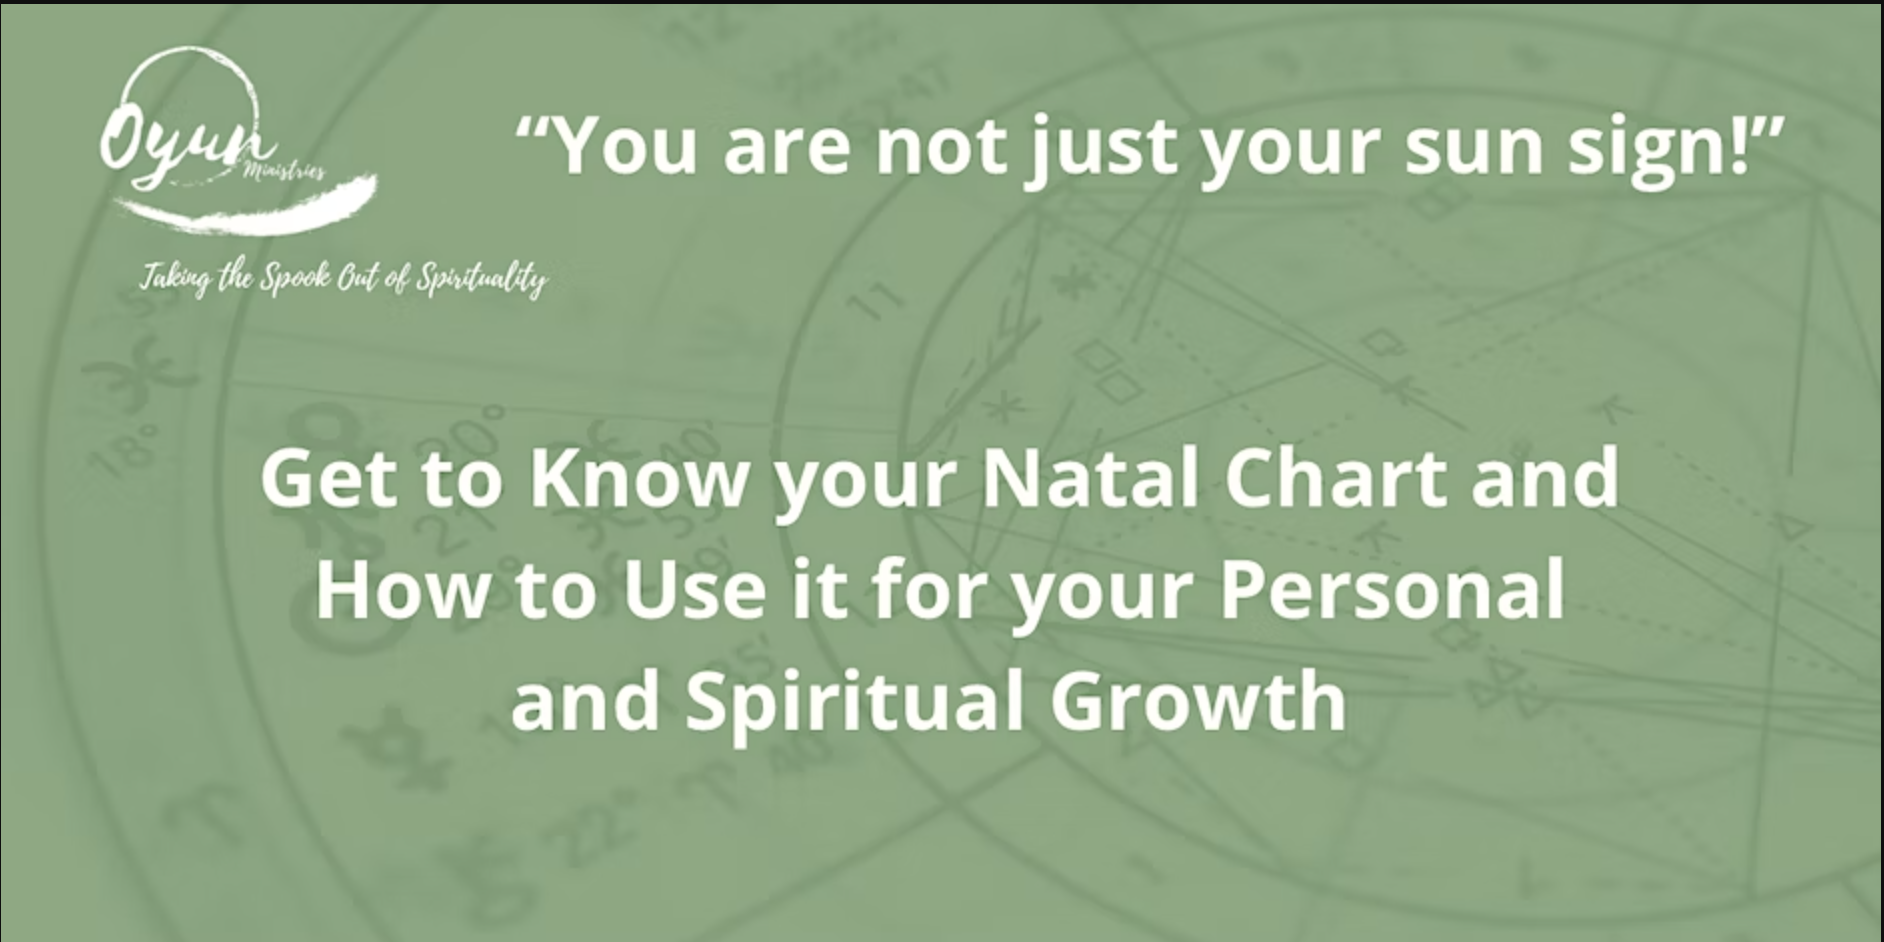 Get to Know your Natal Chart and How to Use It (Session 1)